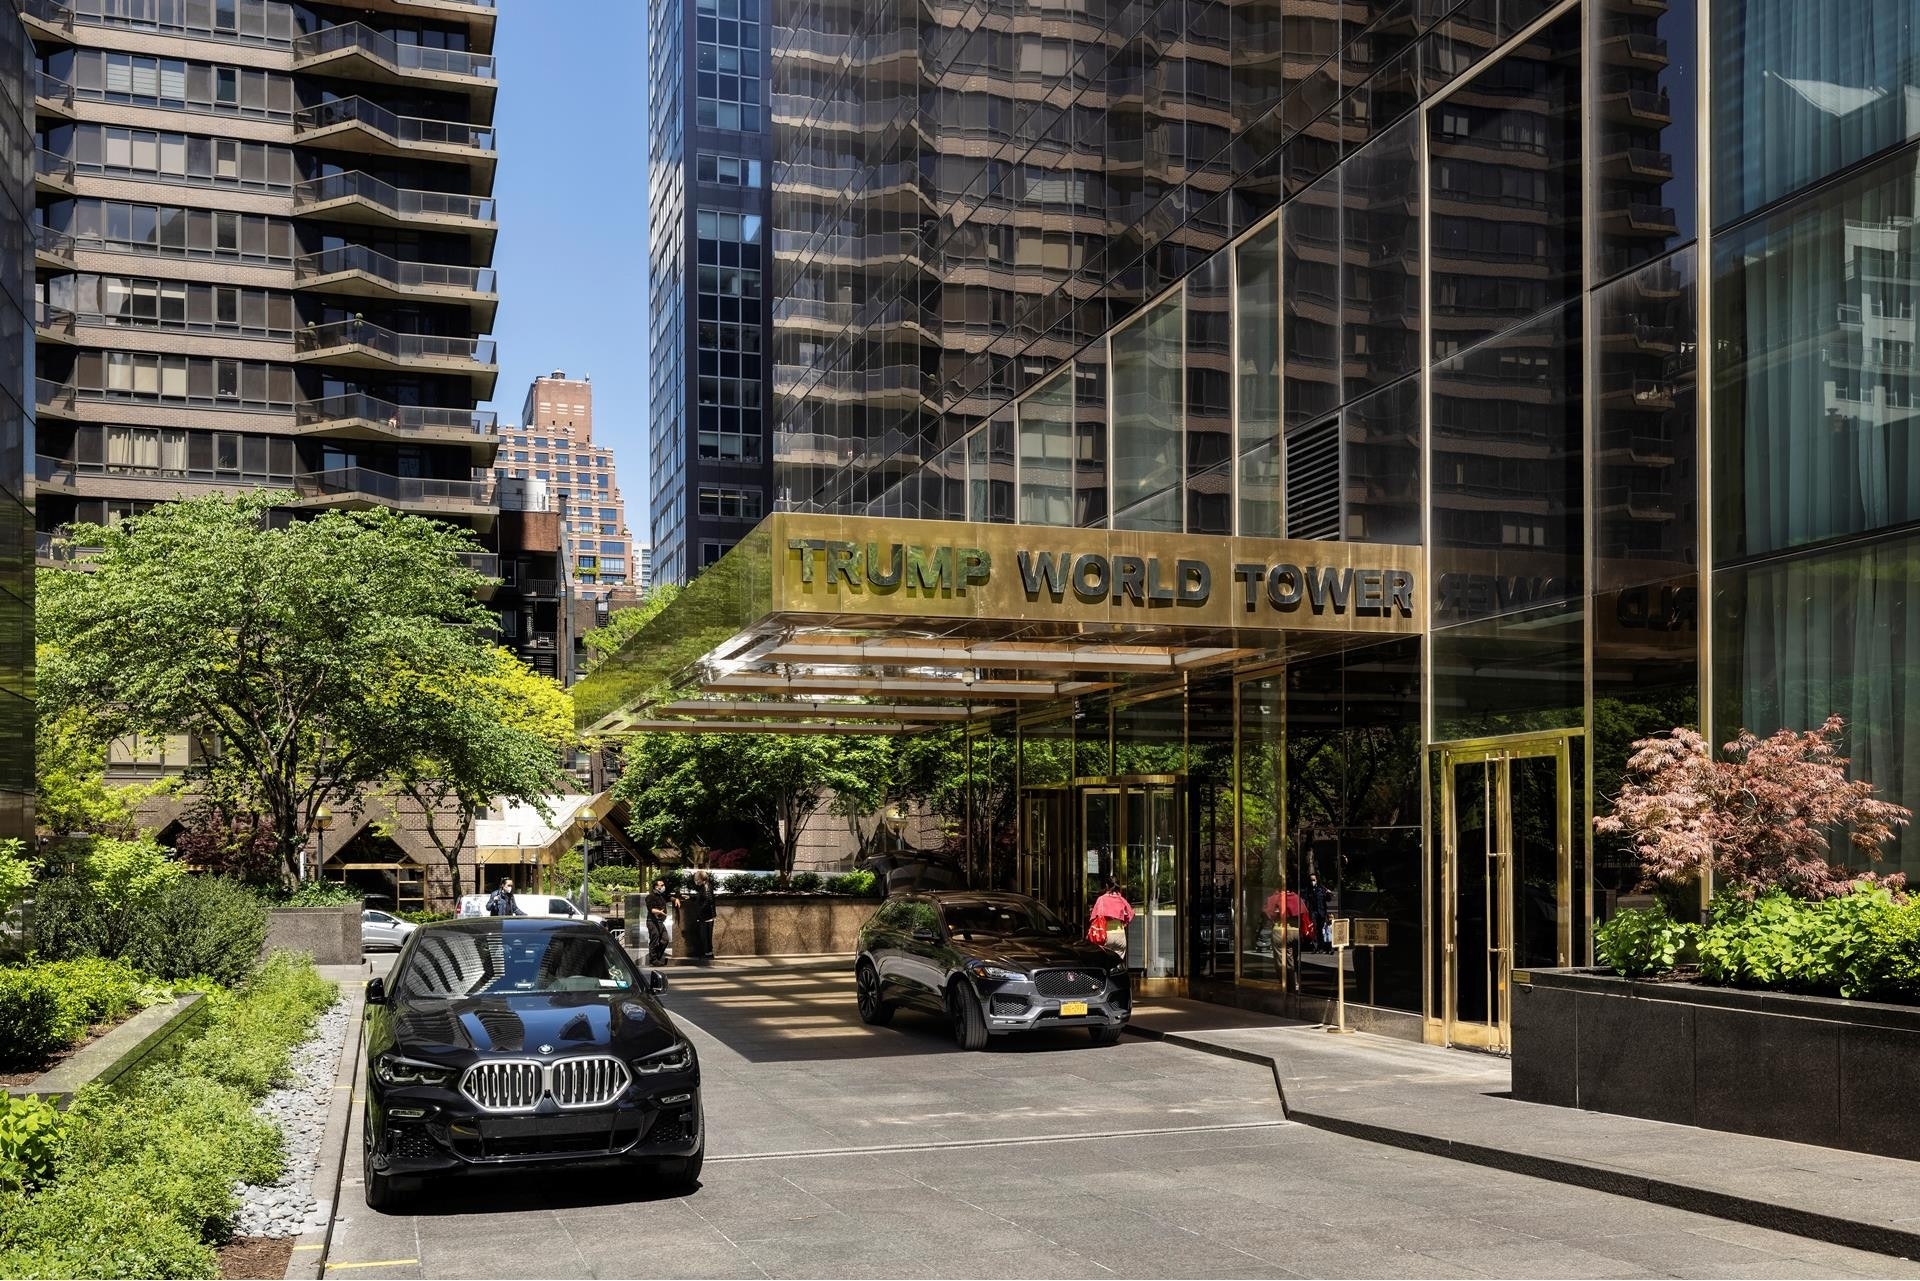 12. Condominiums for Sale at Trump World Tower, 845 UNITED NATIONS PLZ, 60C Turtle Bay, New York, NY 10017